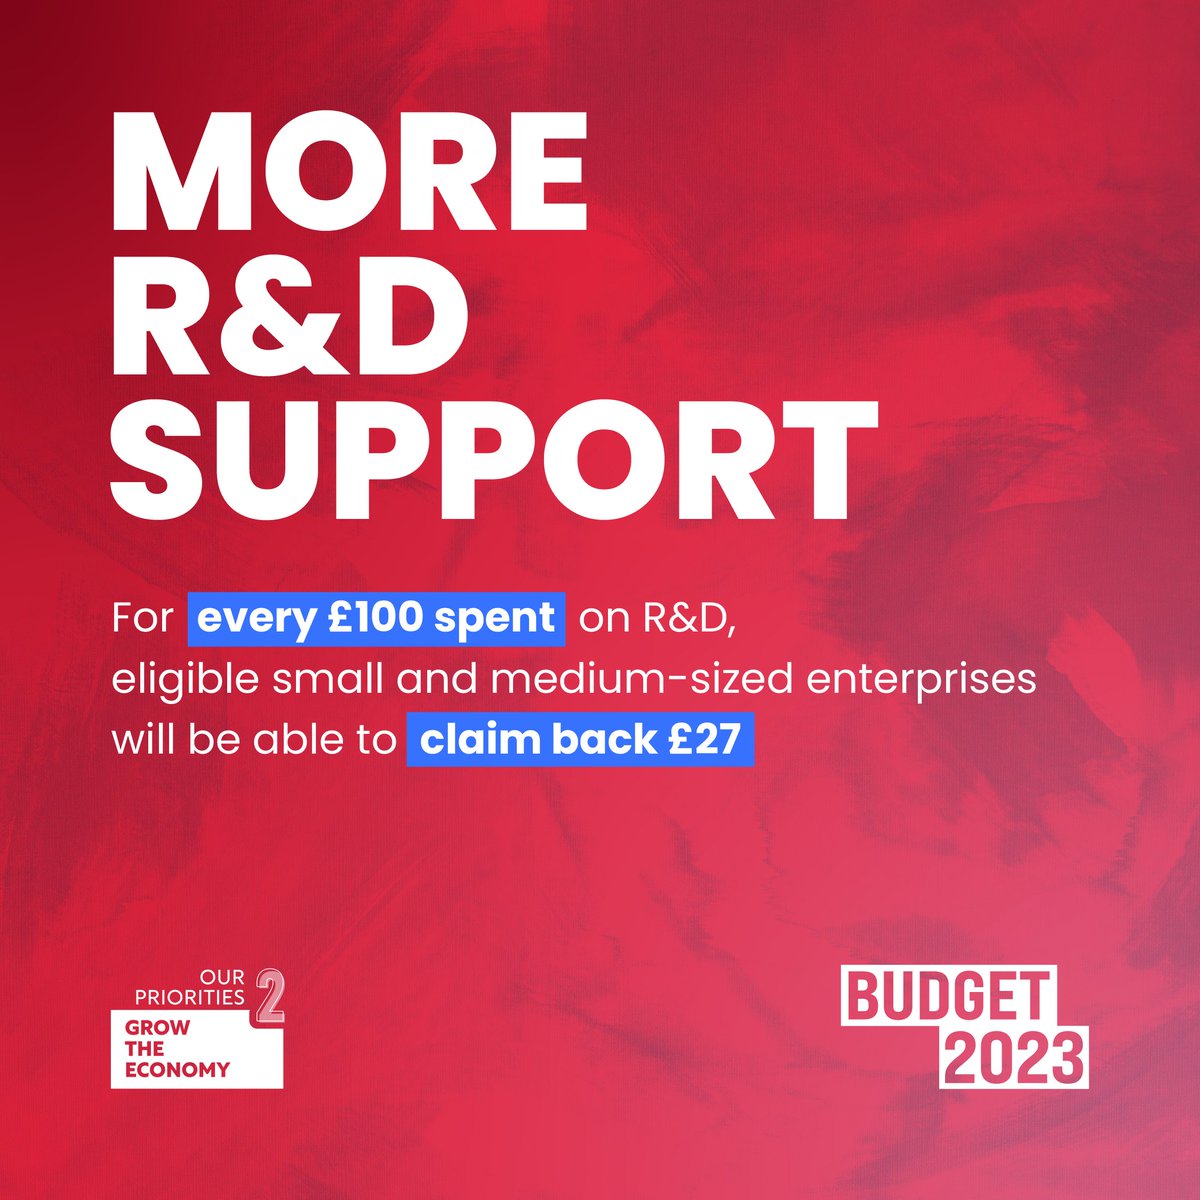 We're introducing additional tax support to help research & development intensive SMEs. For every £100 spent on R&D, eligible companies will be able to claim £27 back, helping them to invest in more R&D and grow for the future.